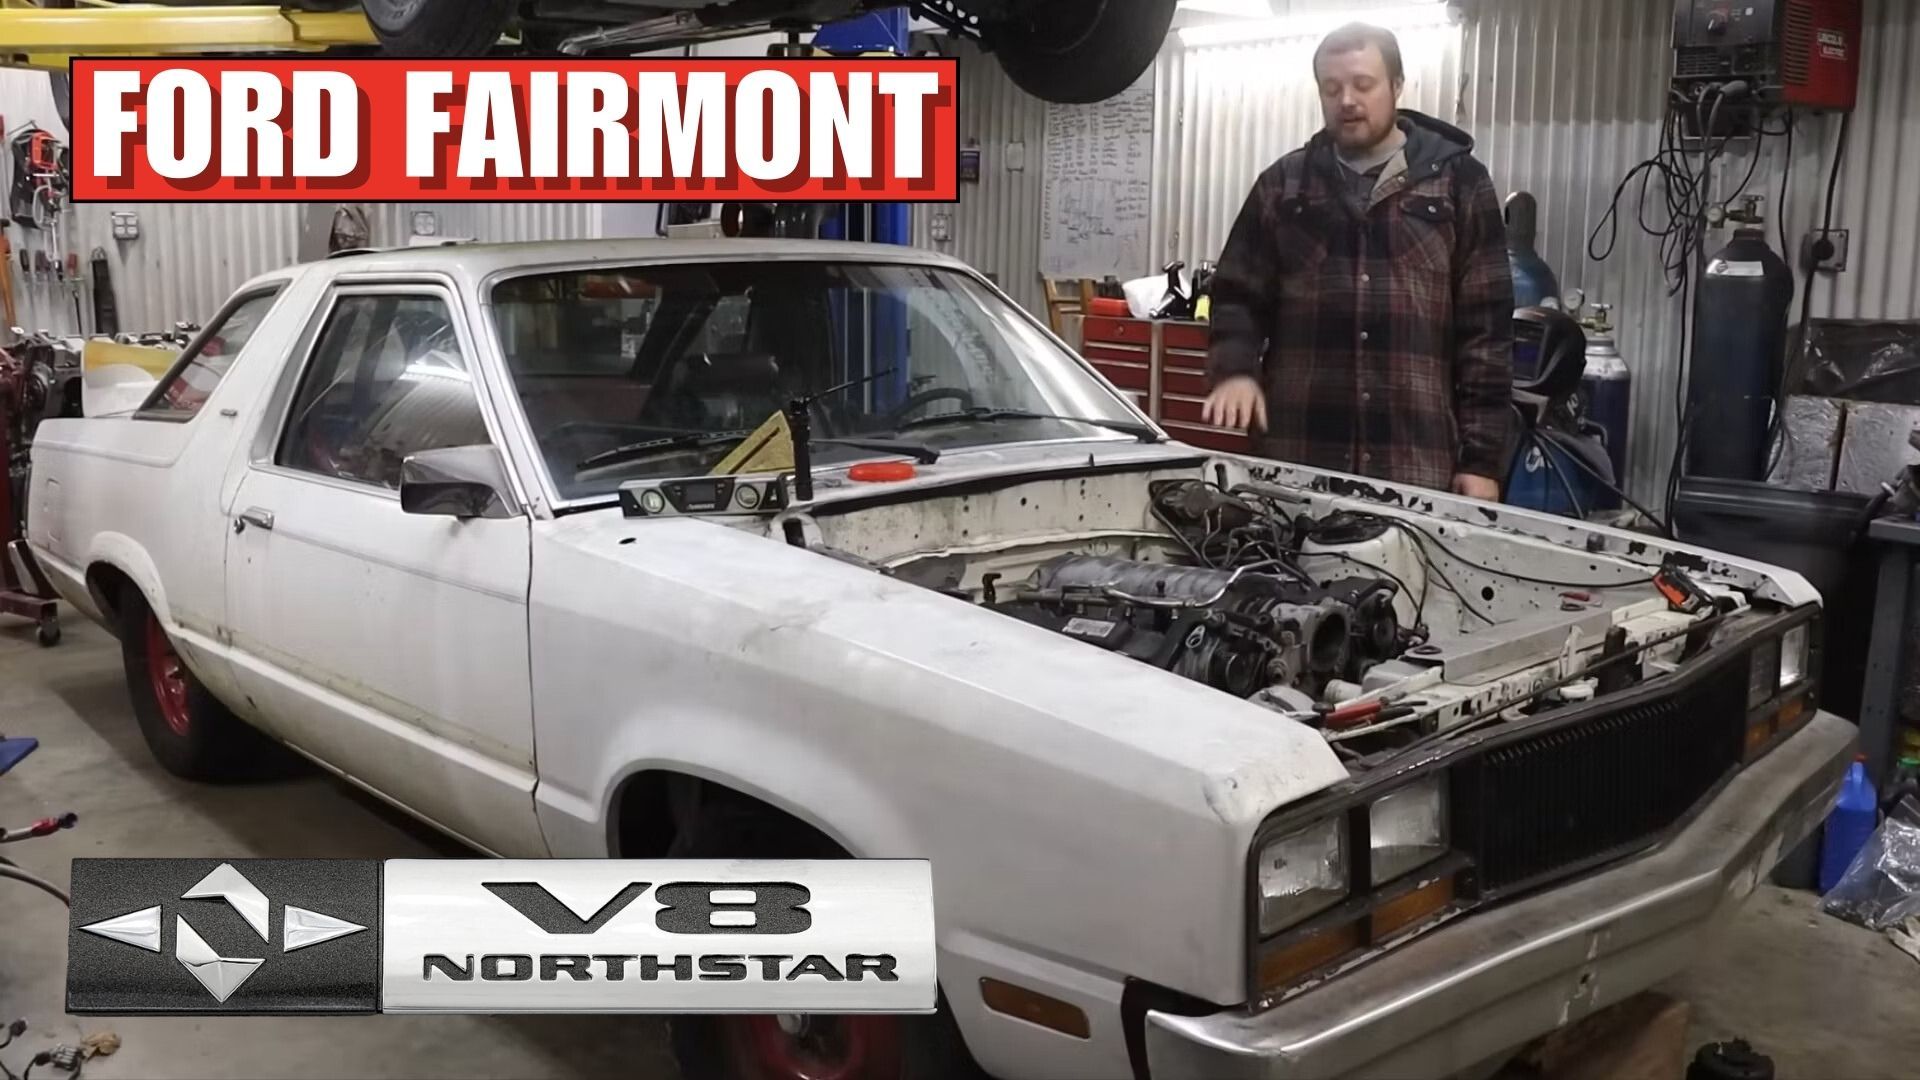 Cadillac Northstar V8 in a Ford Fairmont